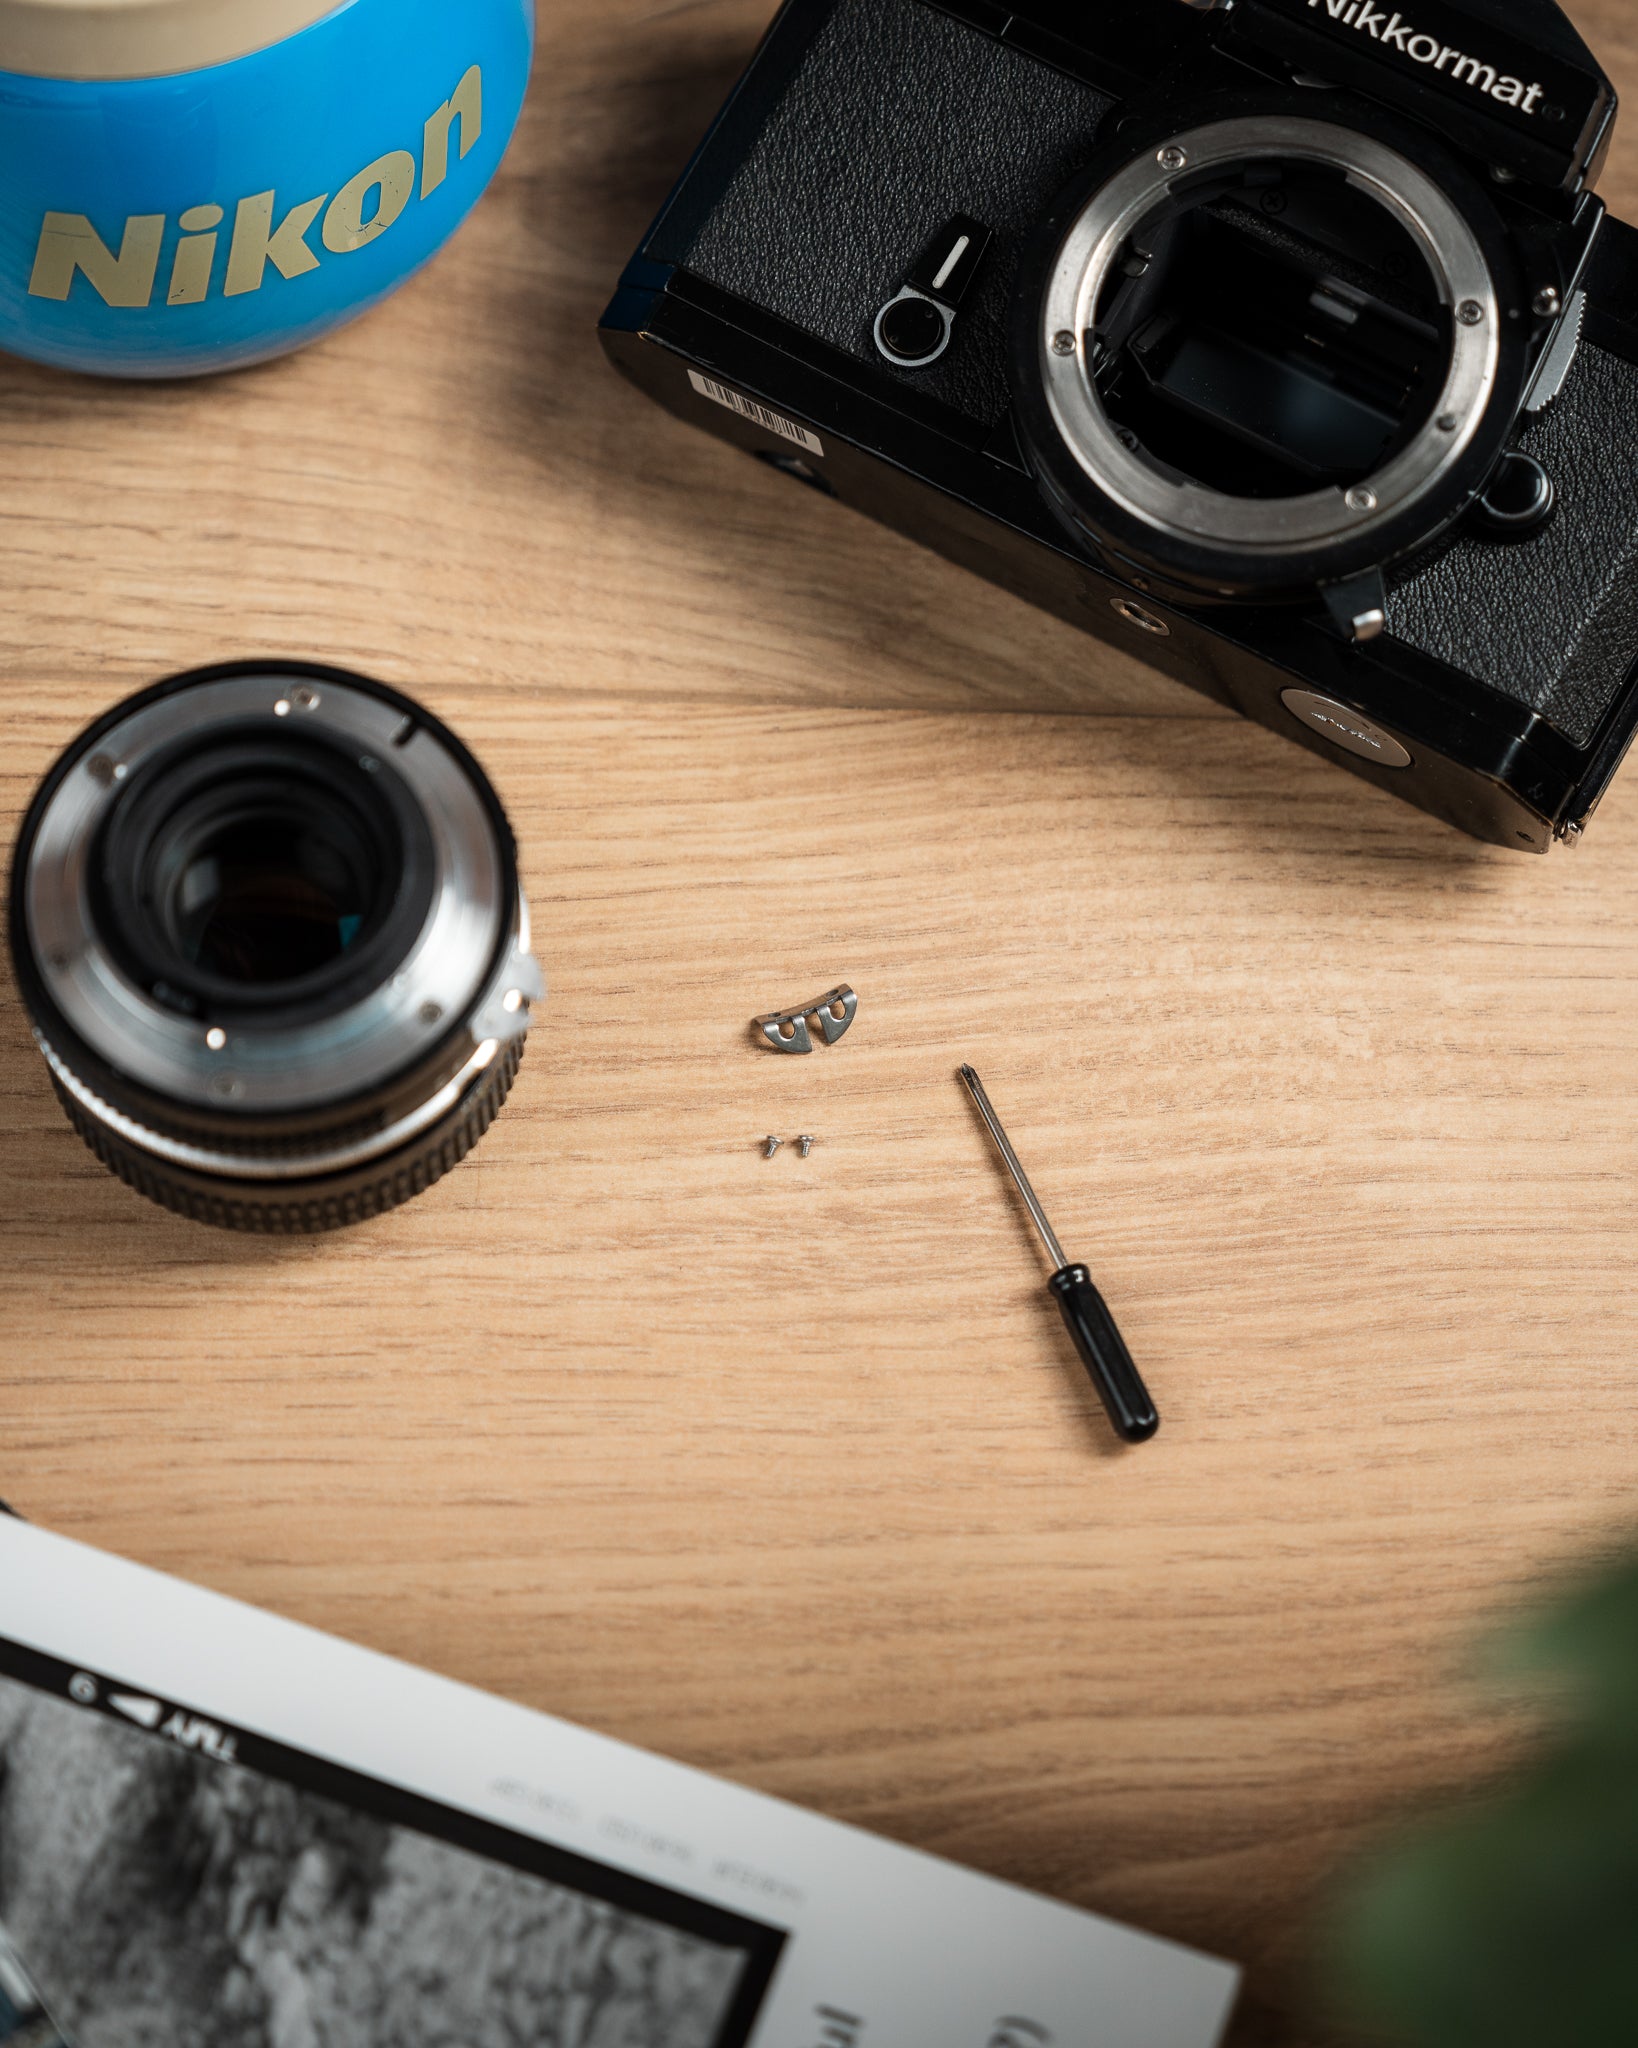 Nikon AI prong and two screws photographed against a wooden table, accompanied by a camera and lens in the image